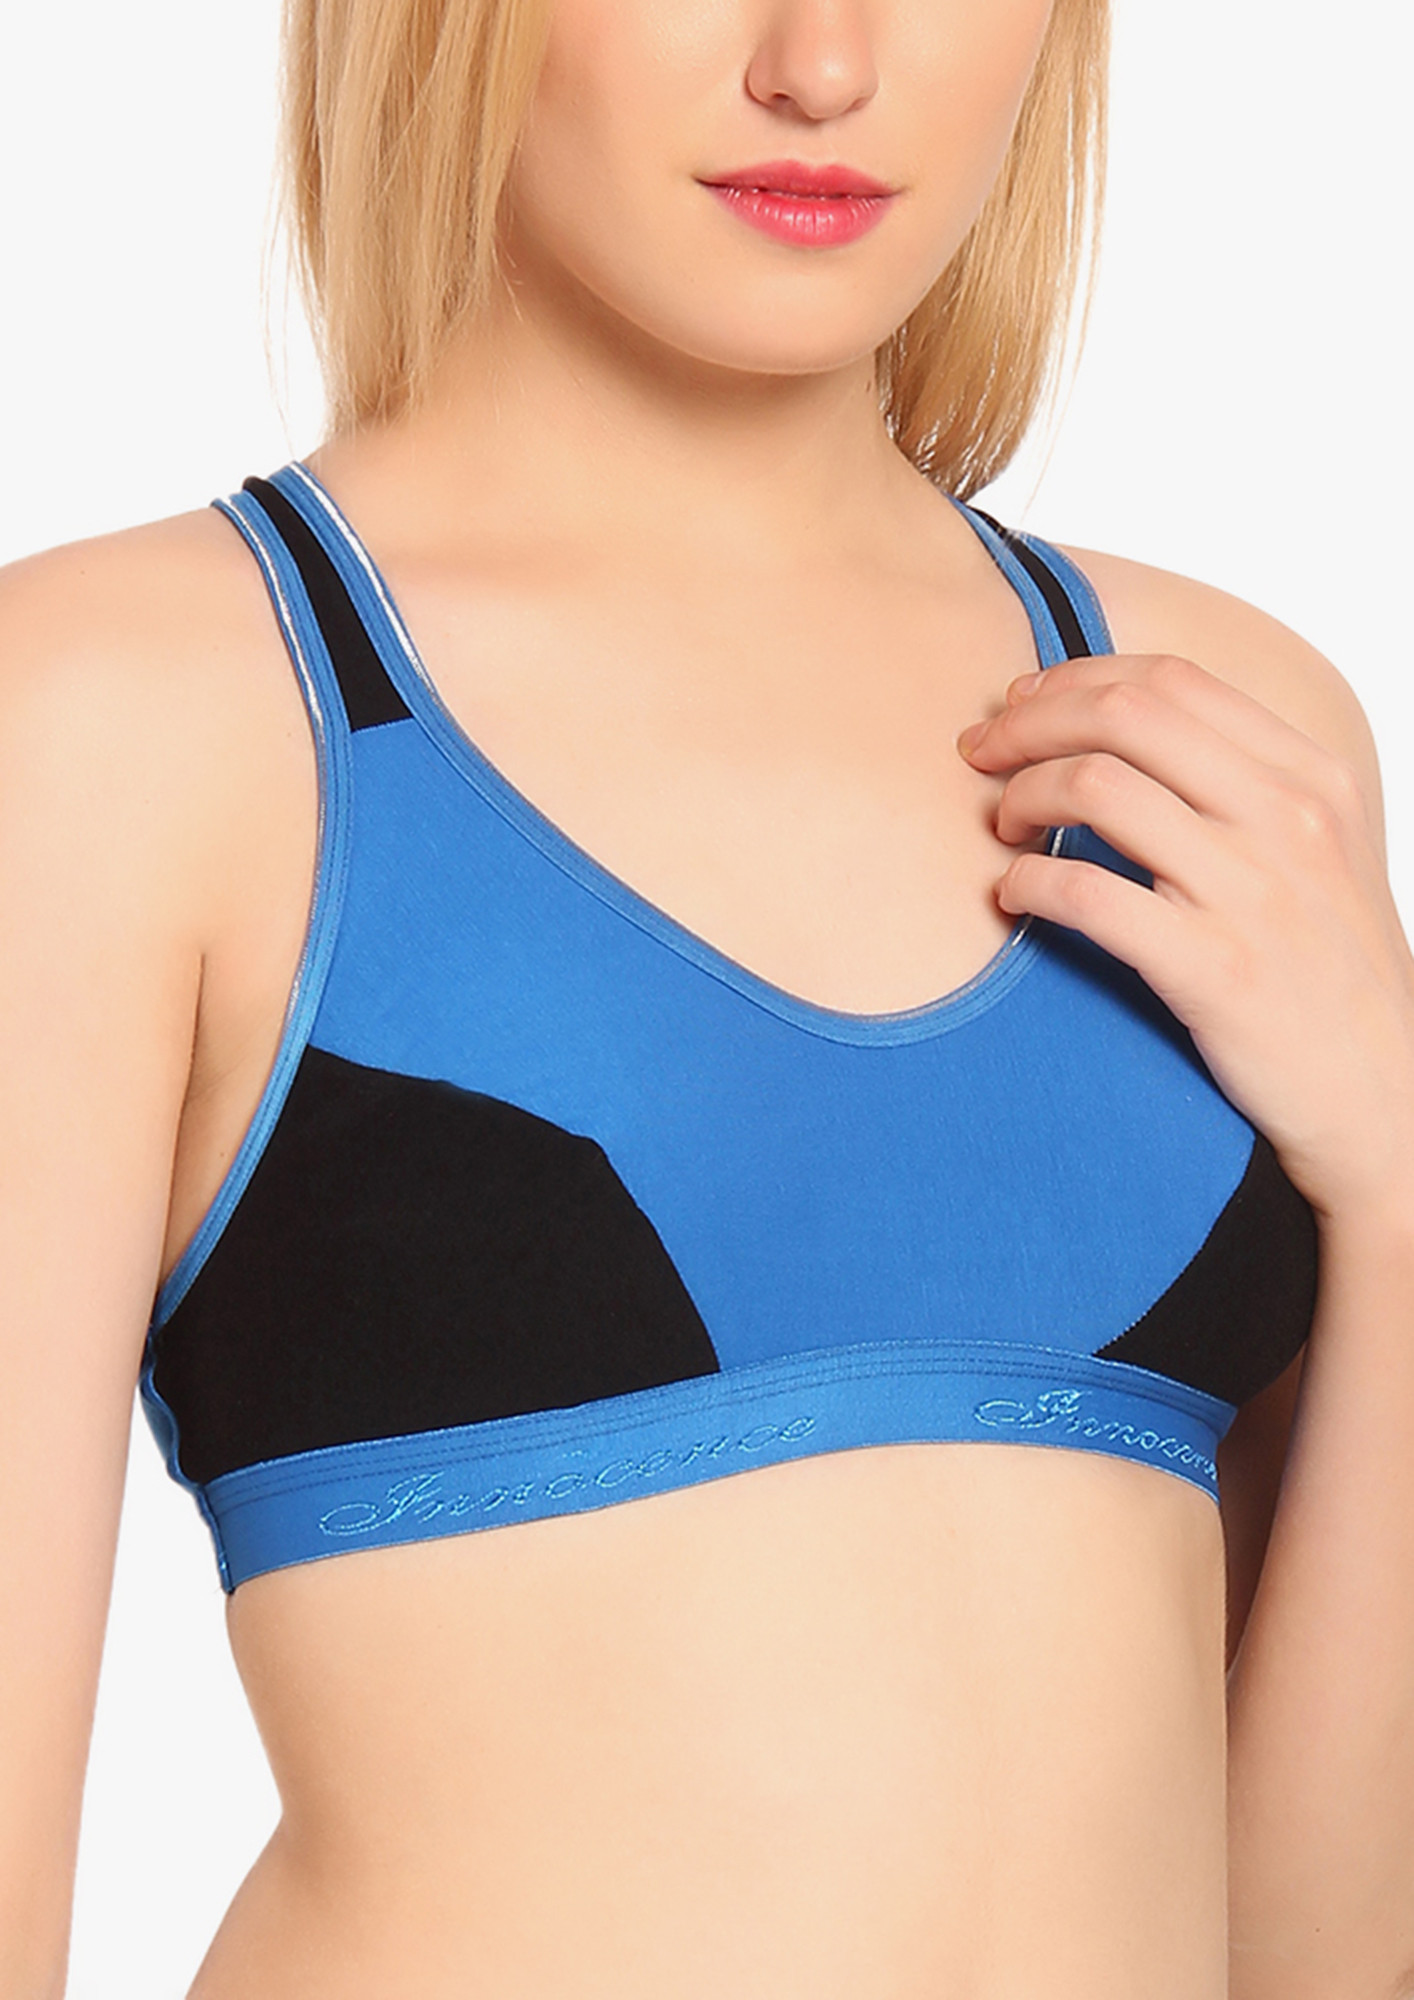 Buy BUBBLY DAYS TURQUOISE NON WIRED NON PADDED SPORTS BRA for